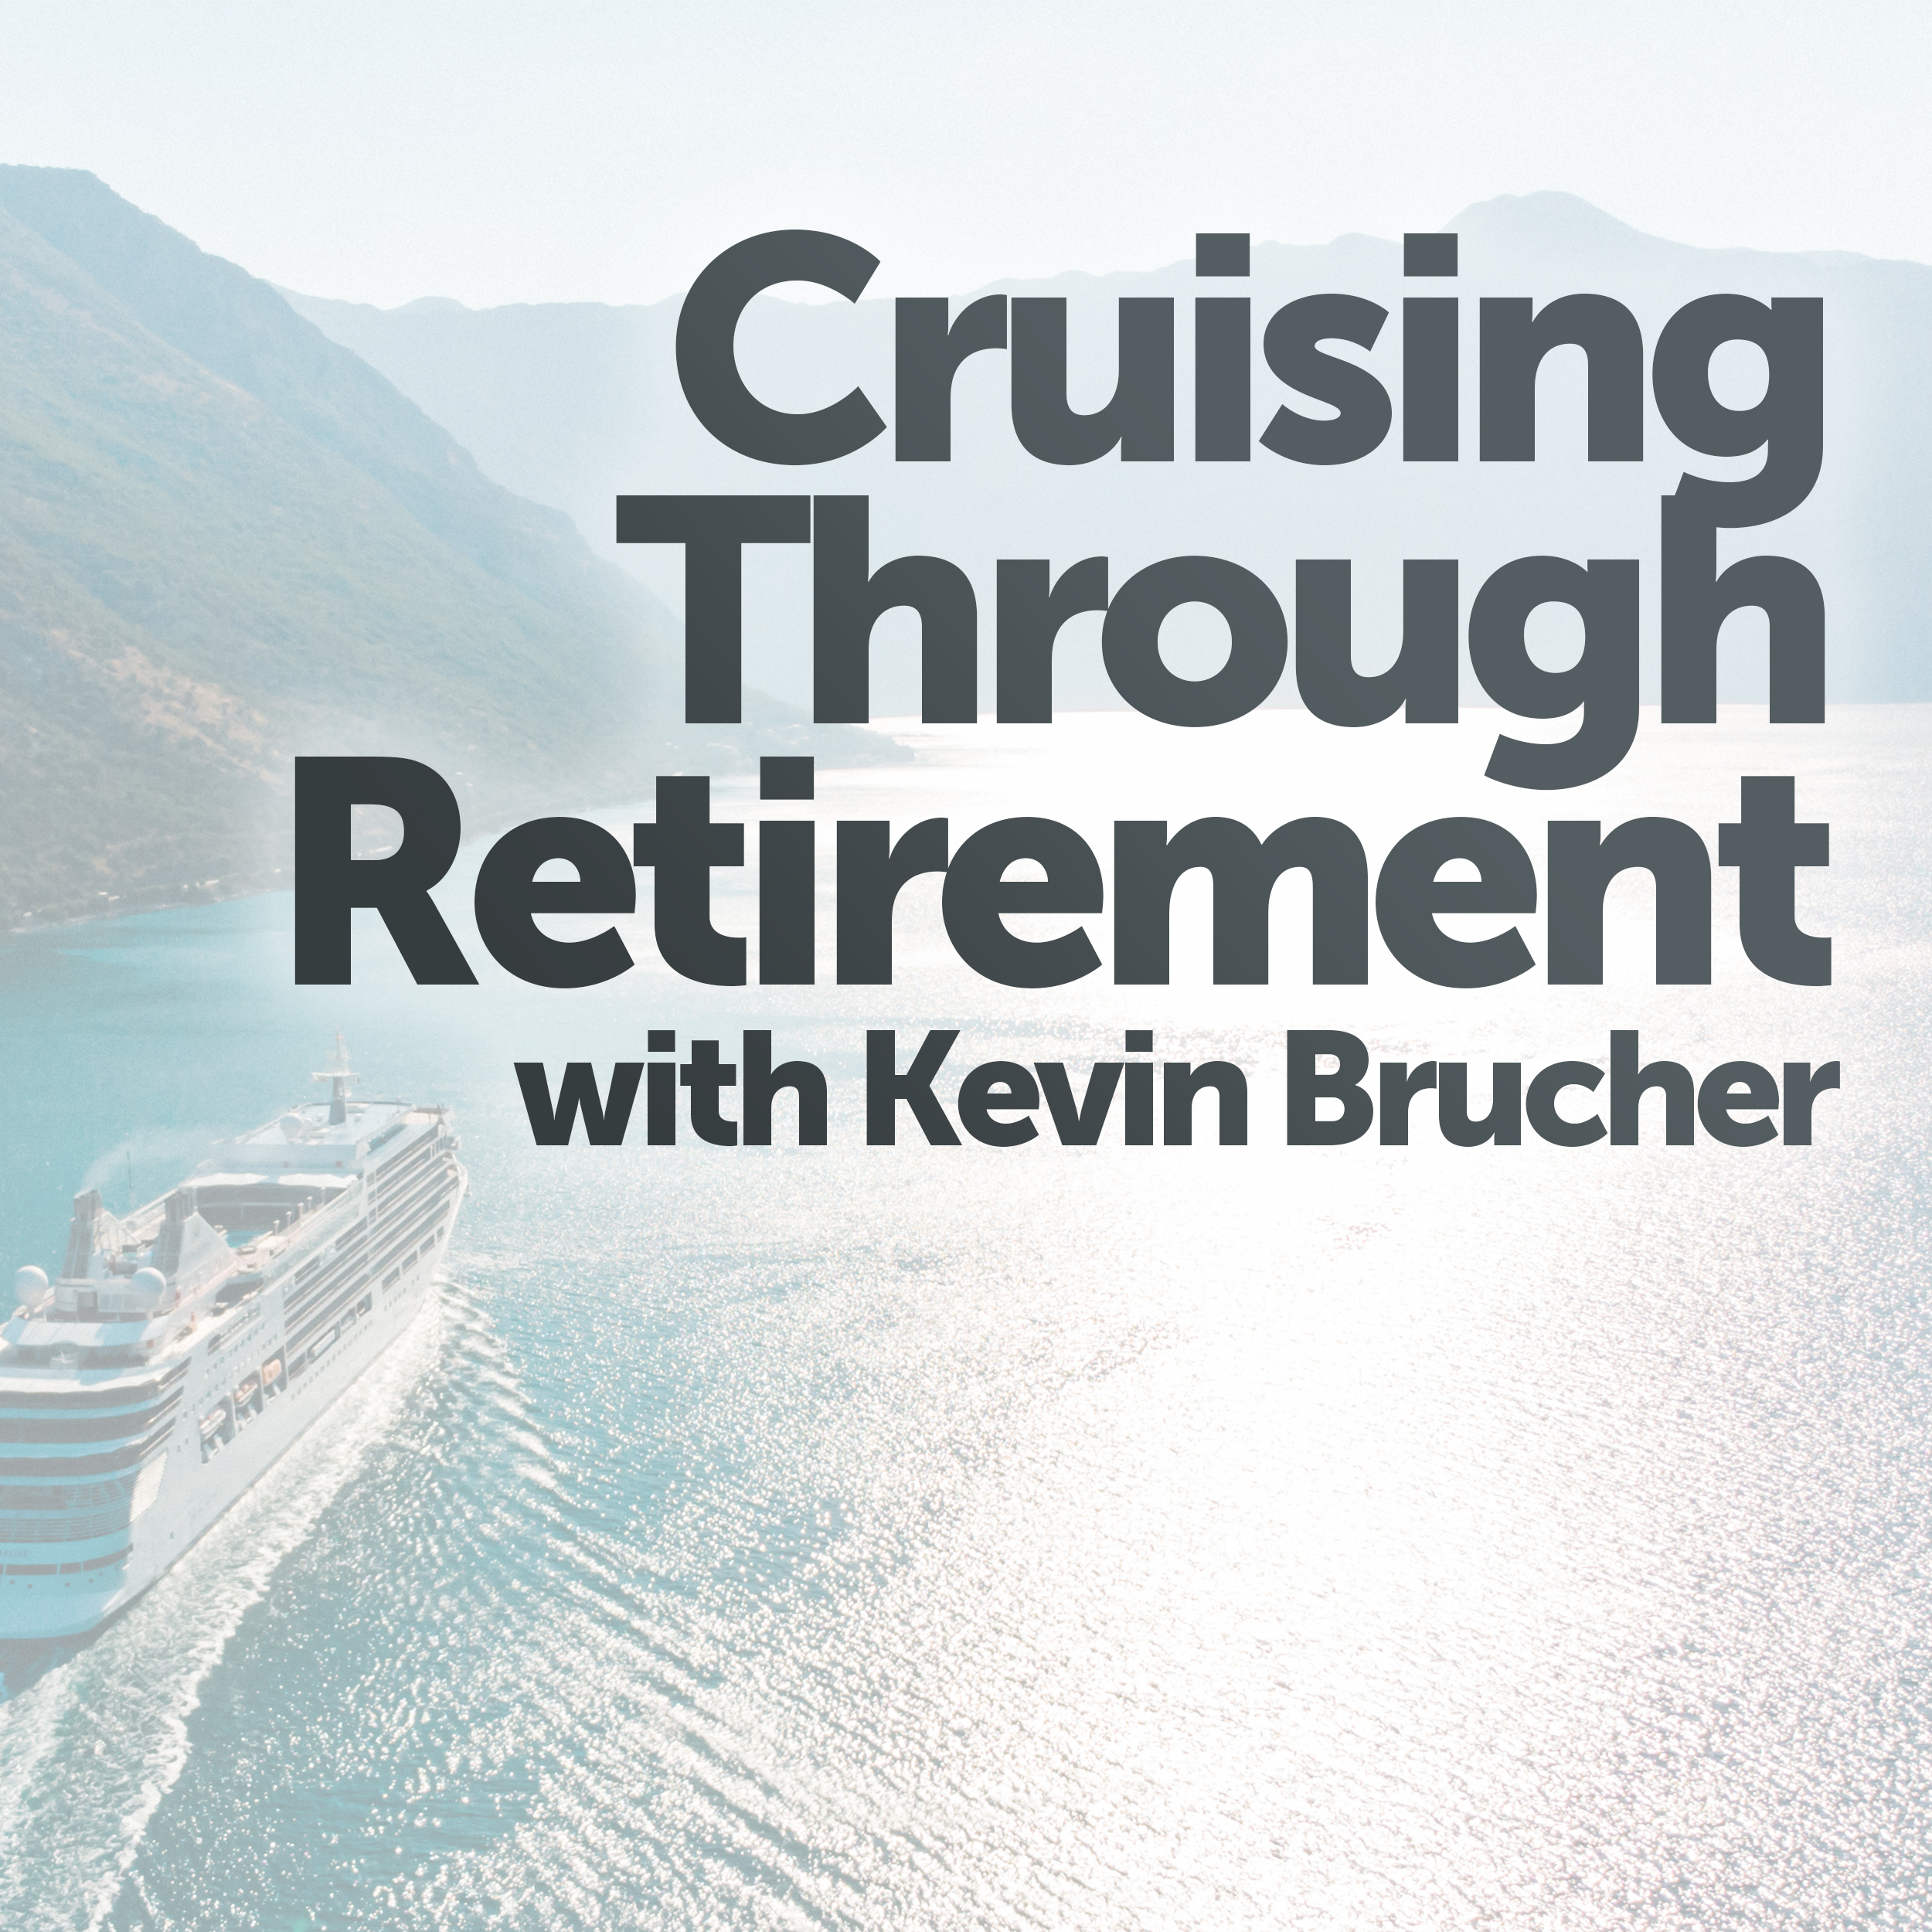 Cruising Through Retirement Reducing taxes in retirement. That’s what Kevin has on his mind this week.